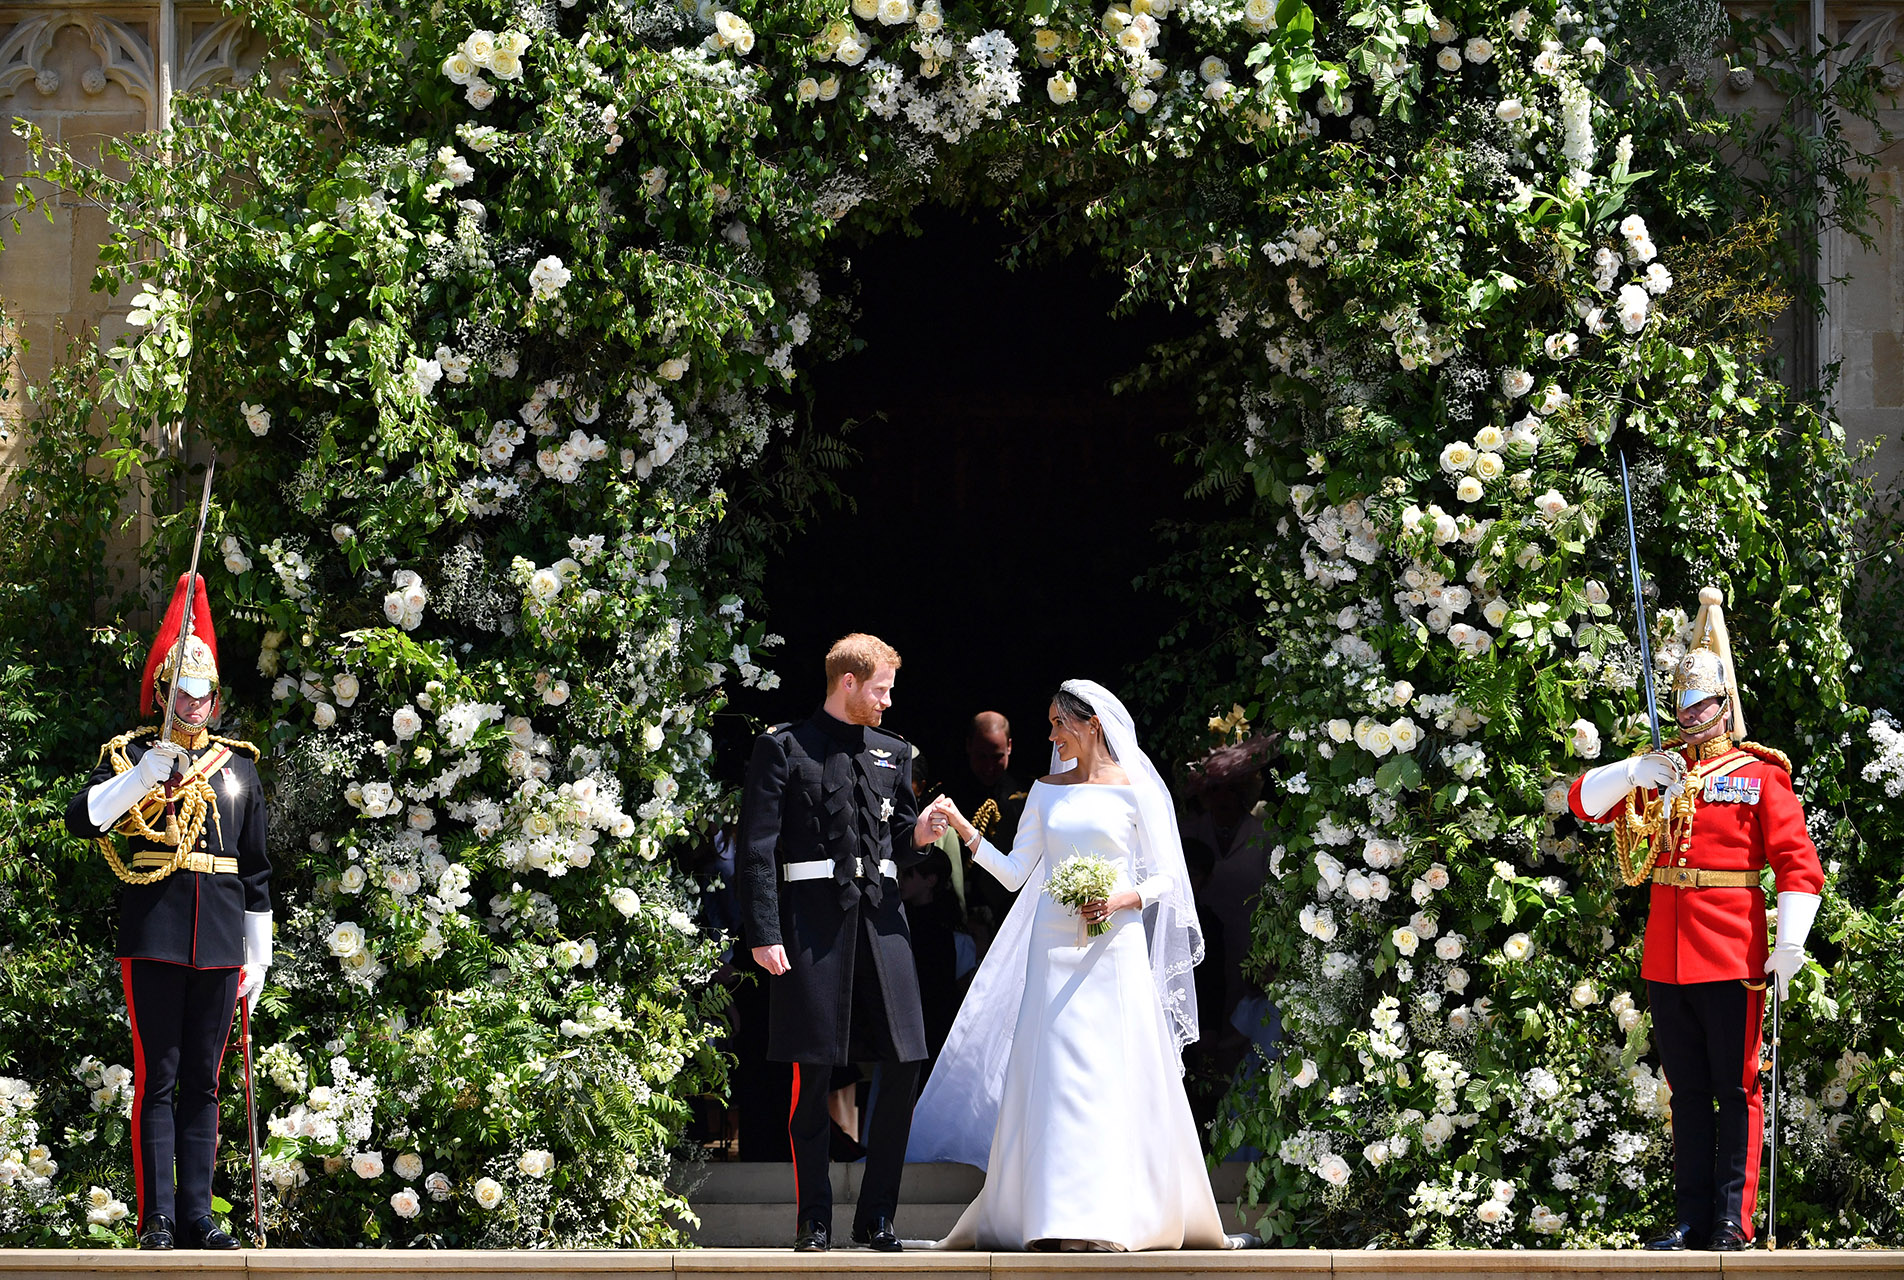 All You Need To Know About The Royal Wedding Décor!